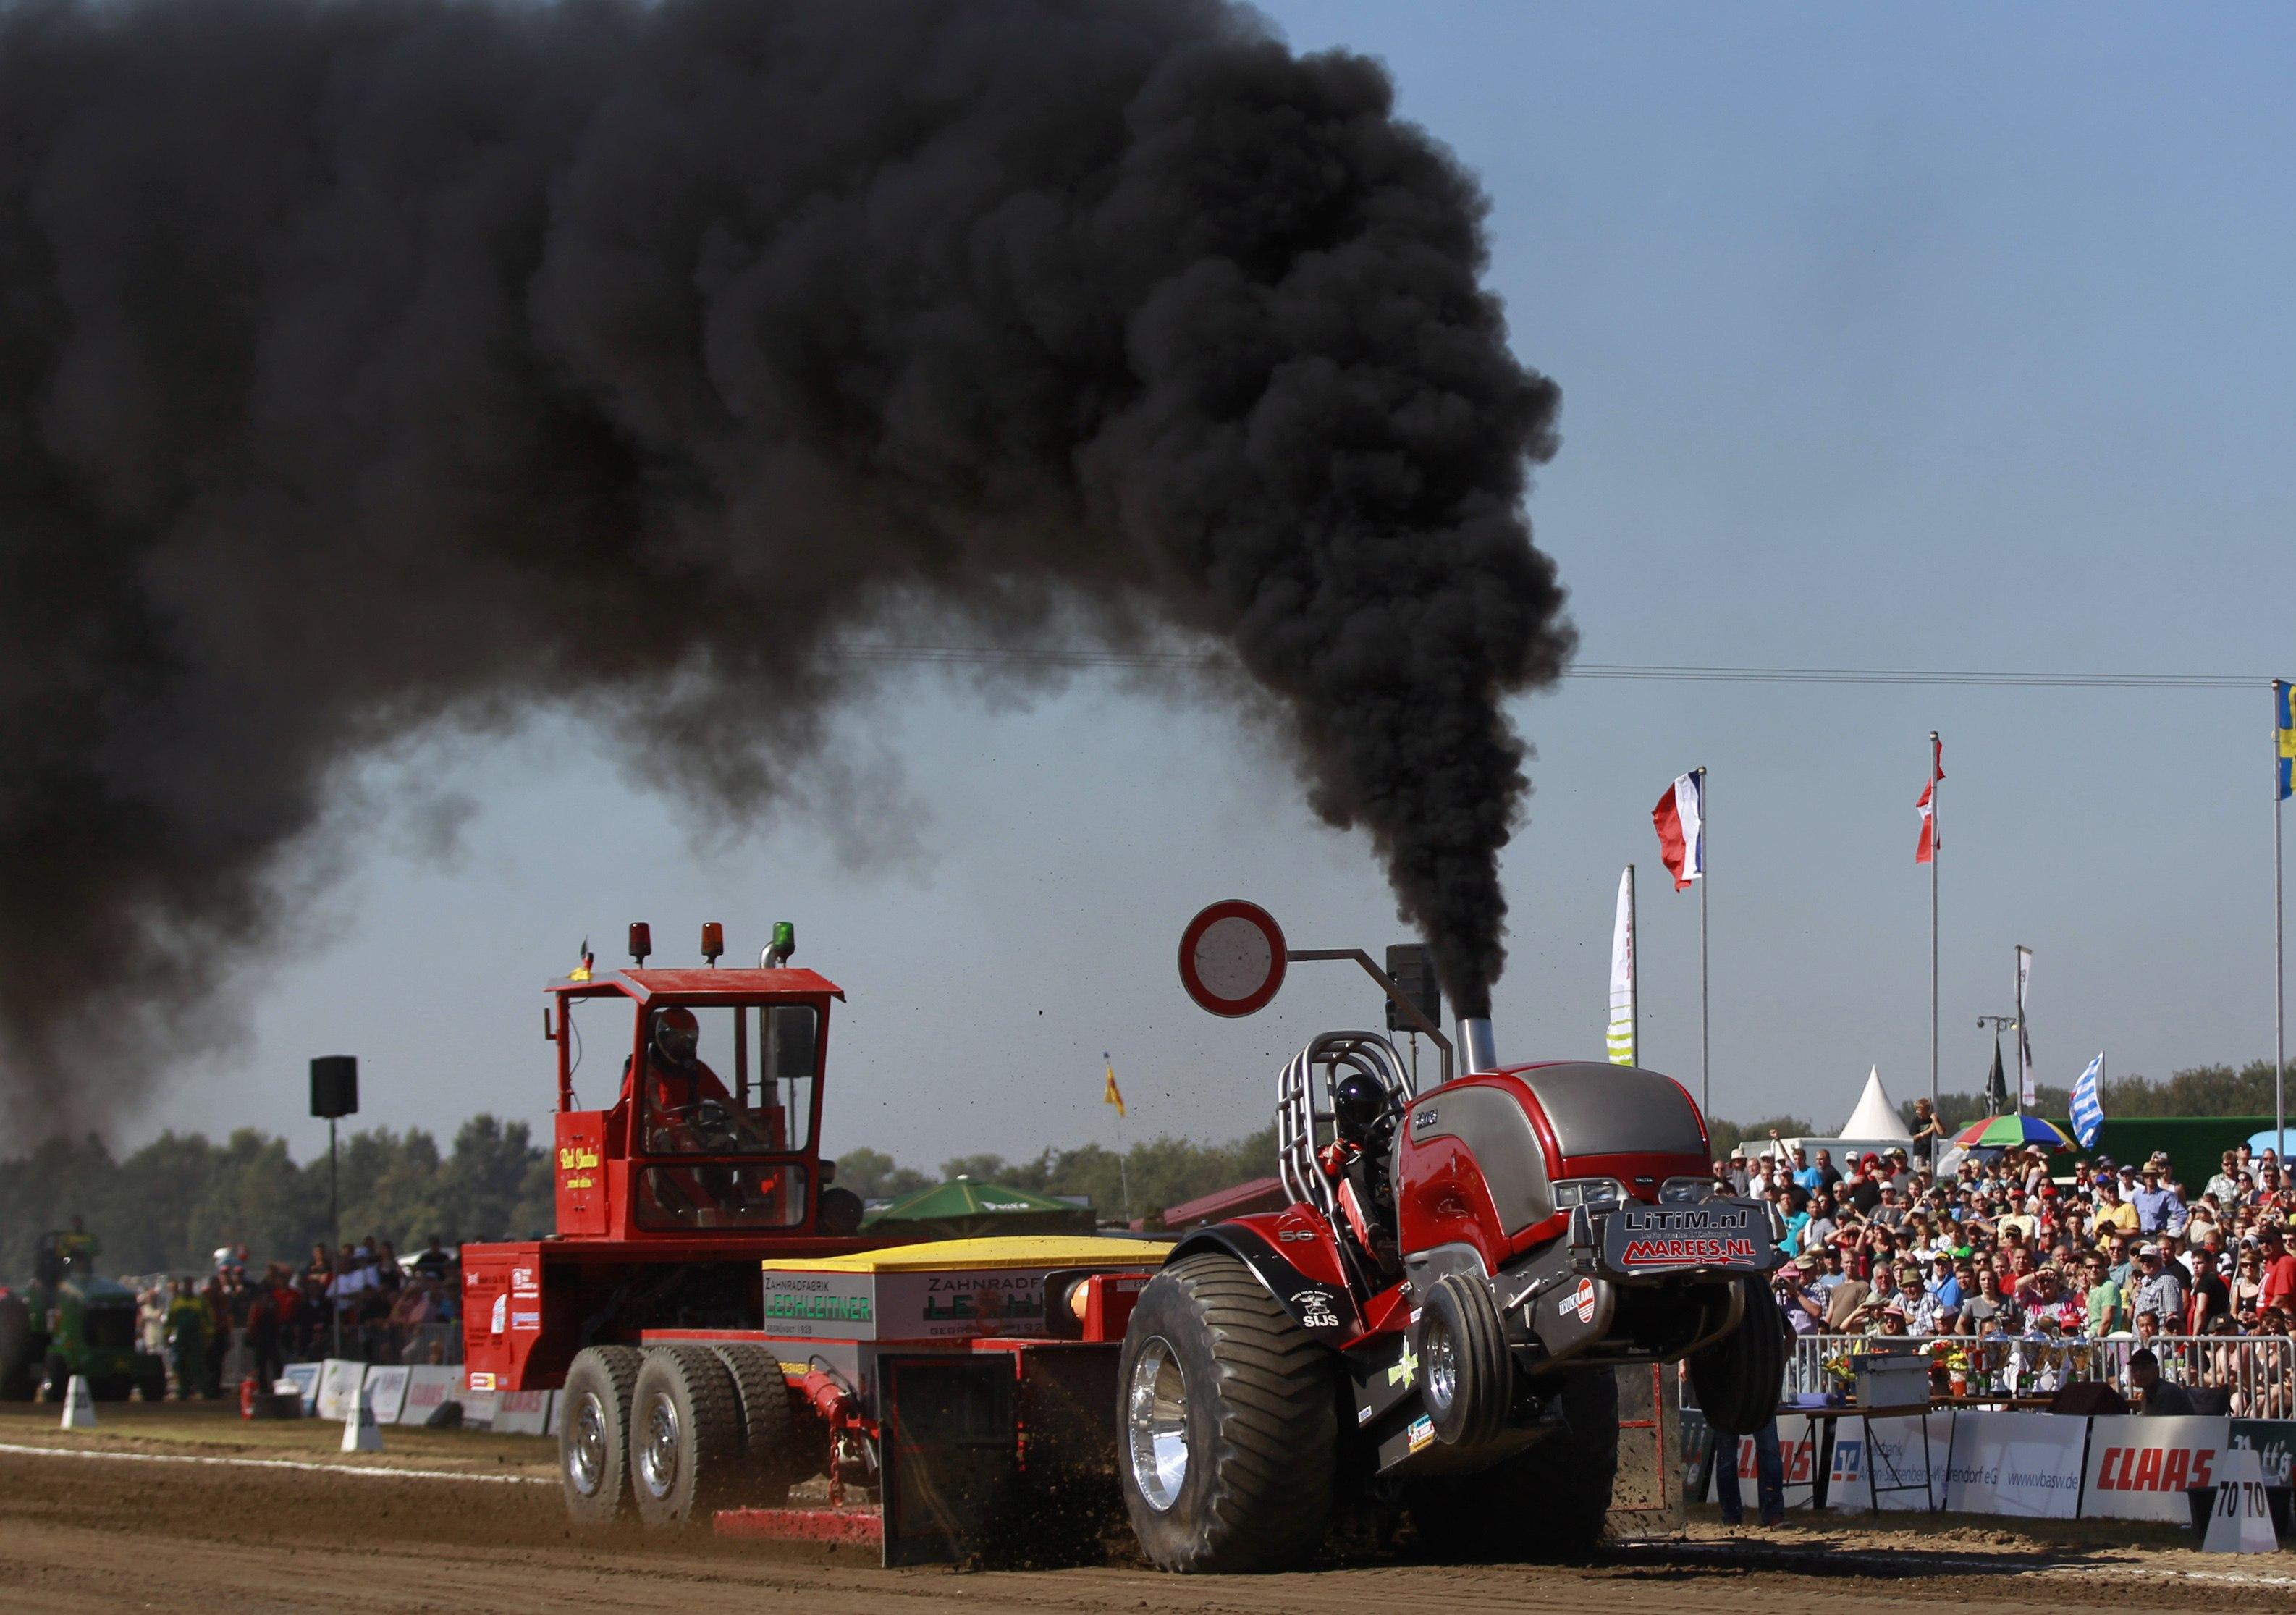 Gallery For gt Tractor Pulling Wallpaper